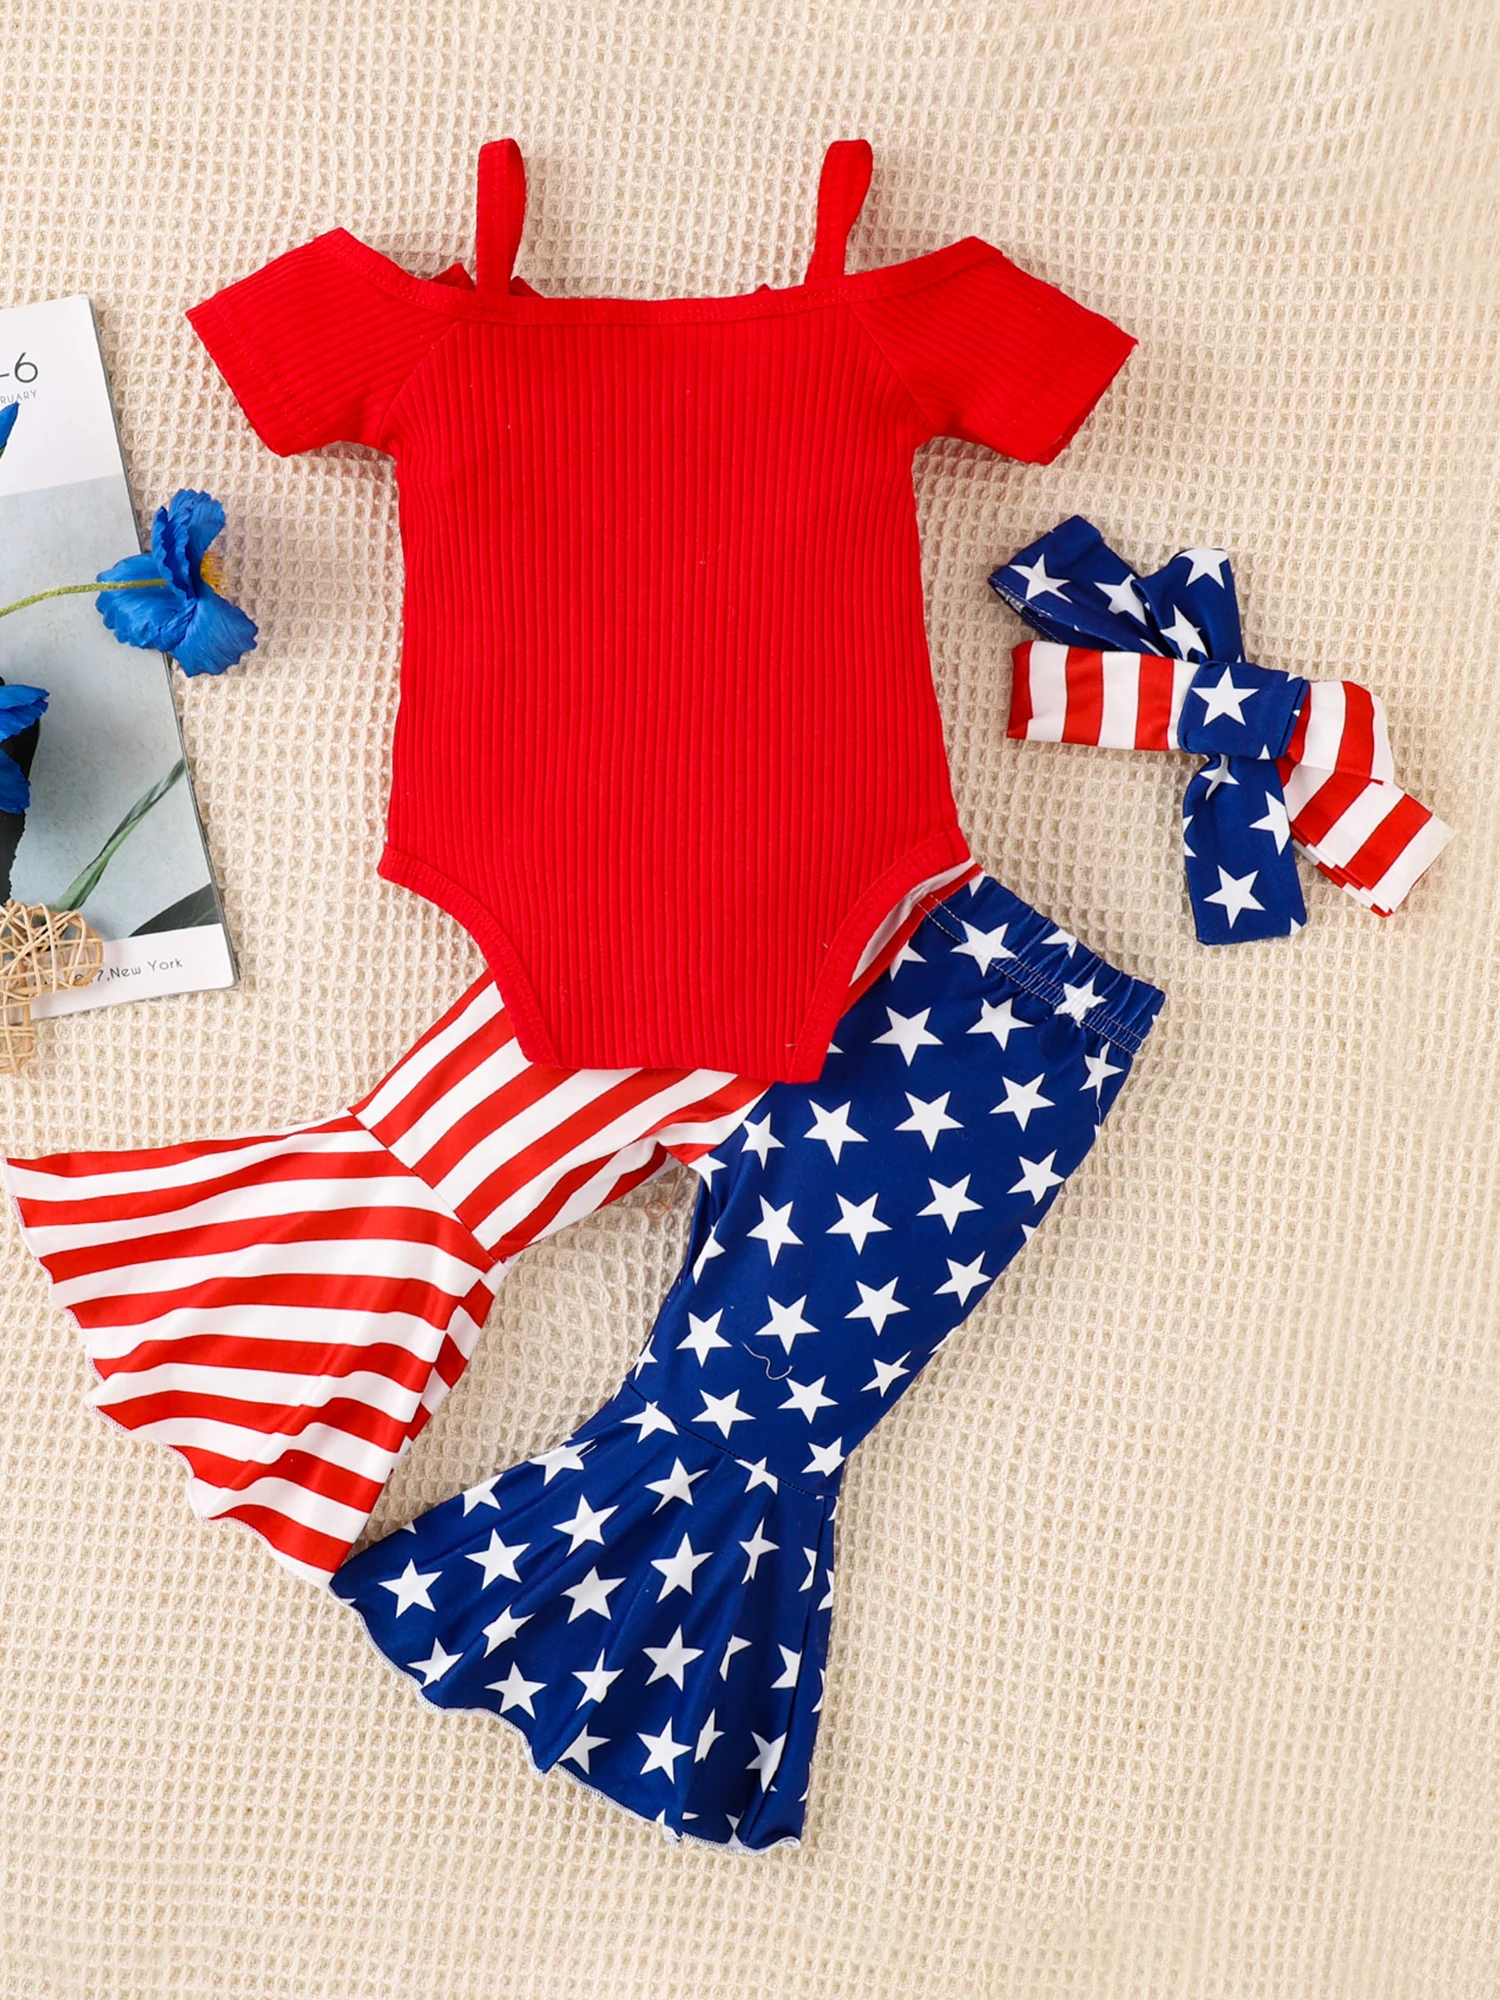 

Toddler Baby Girl Bell Bottoms Outfits Short Sleeve Romper Rib Knit Button Bodysuit Flare Pants Clothes Set (Red 6-12 Months)